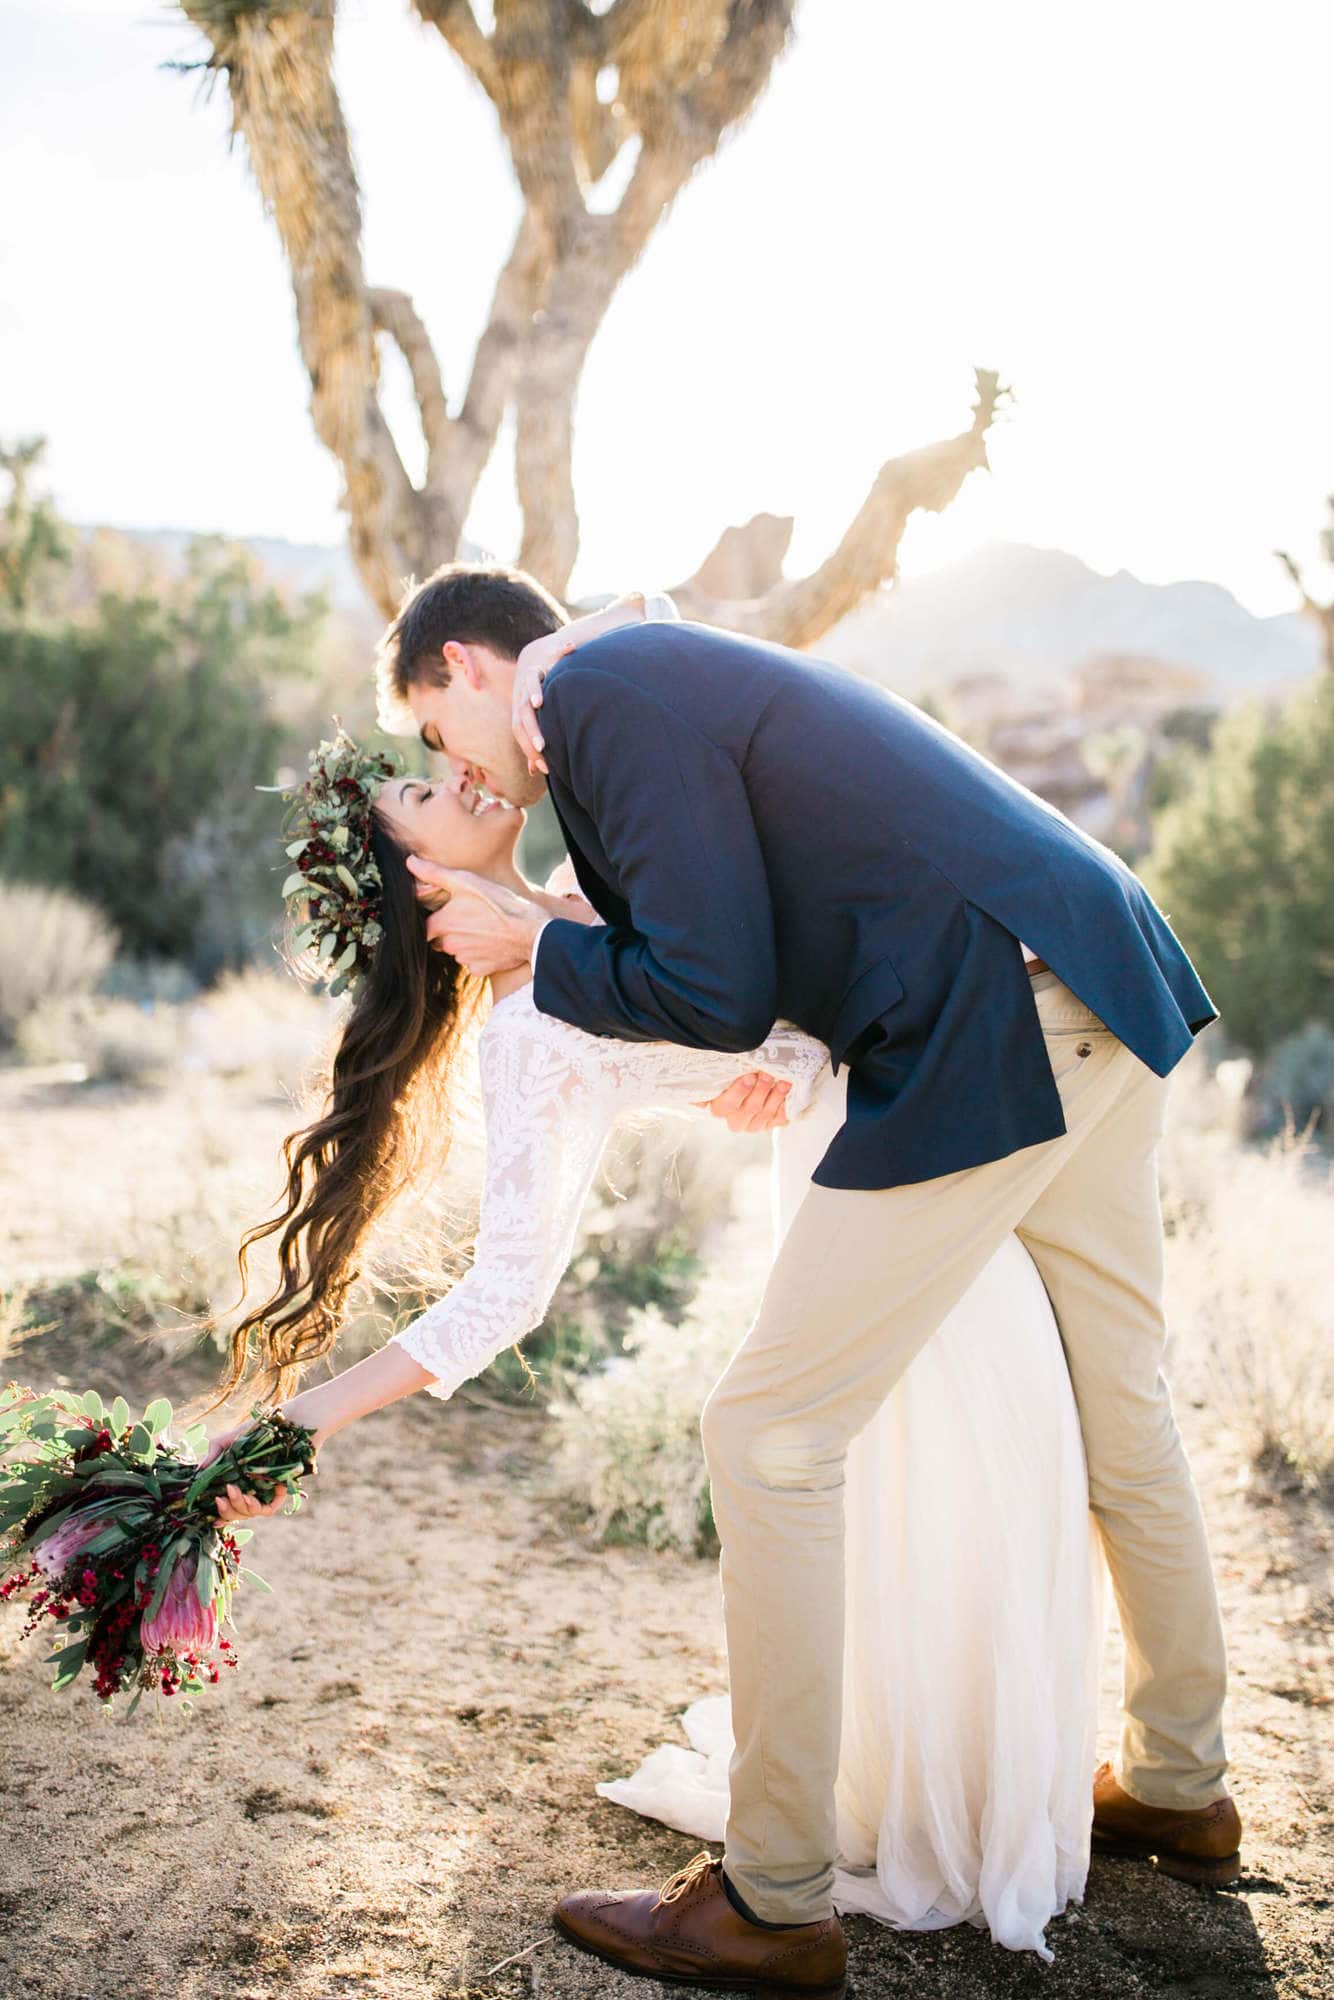 This Joshua Tree wedding was a real Peak Existence experience. The day was full of laughter, tears, & the prettiest light the desert can offer.